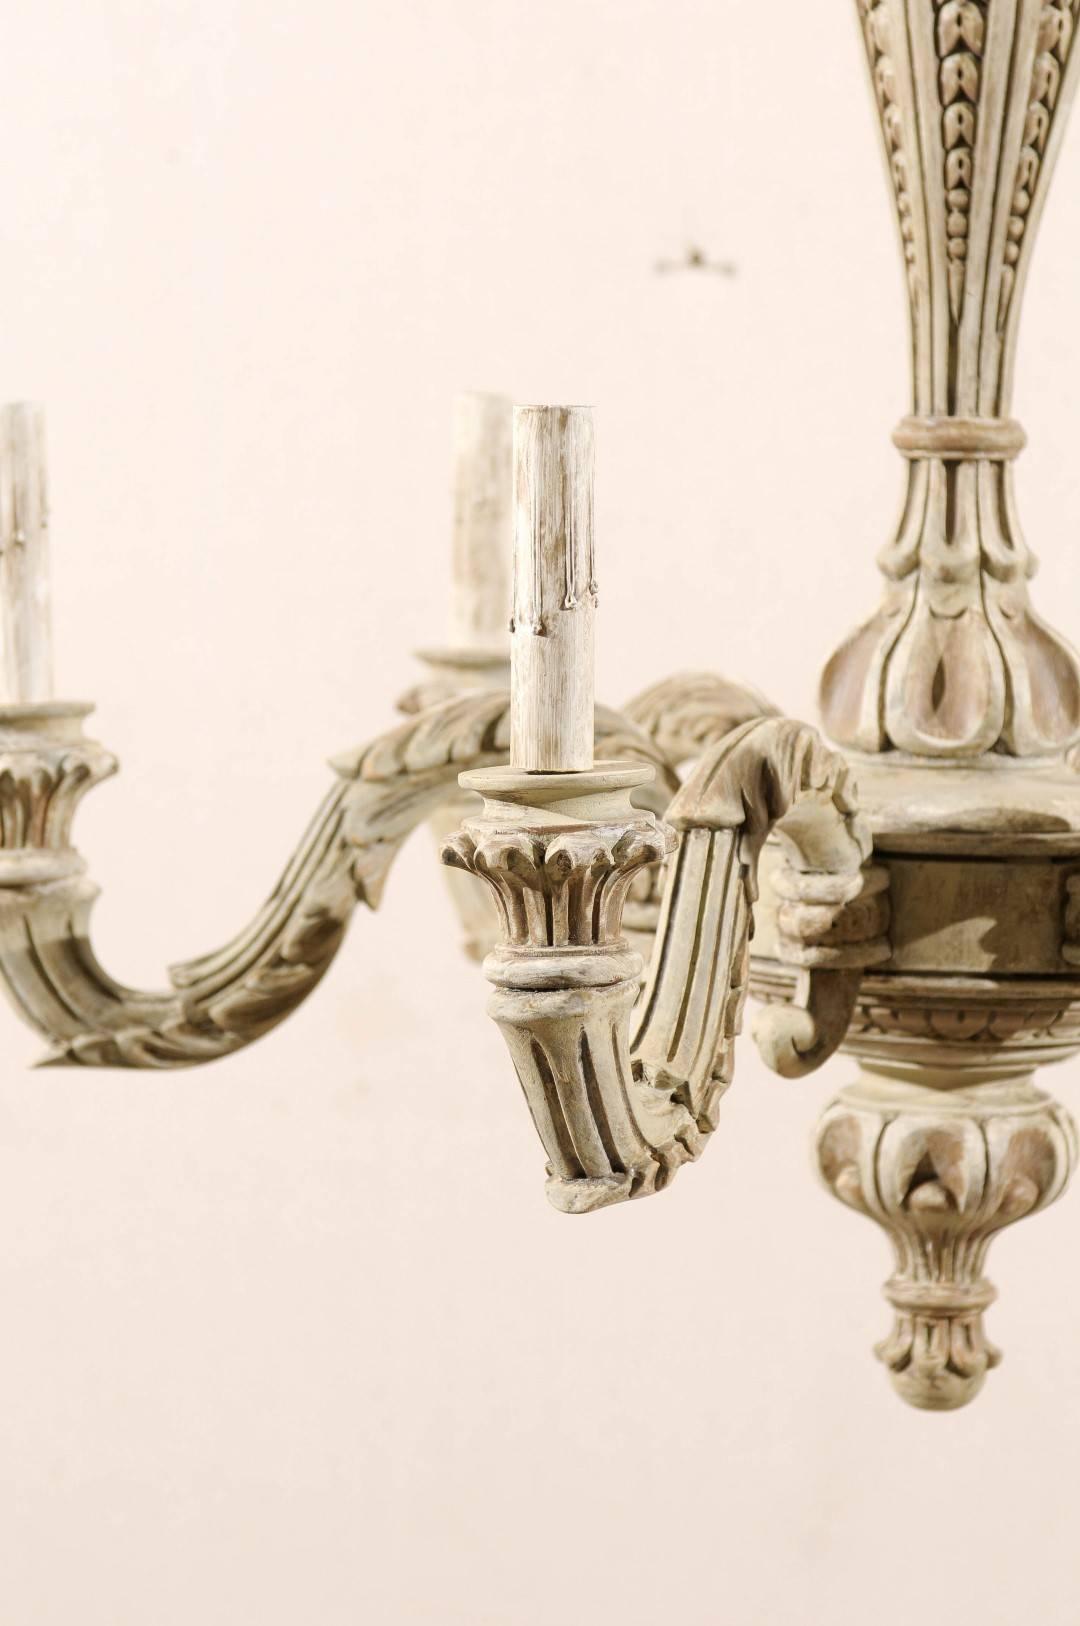 French Six-Light Carved Wood Chandelier with Scroll Arms in Grey-Green Hues 2